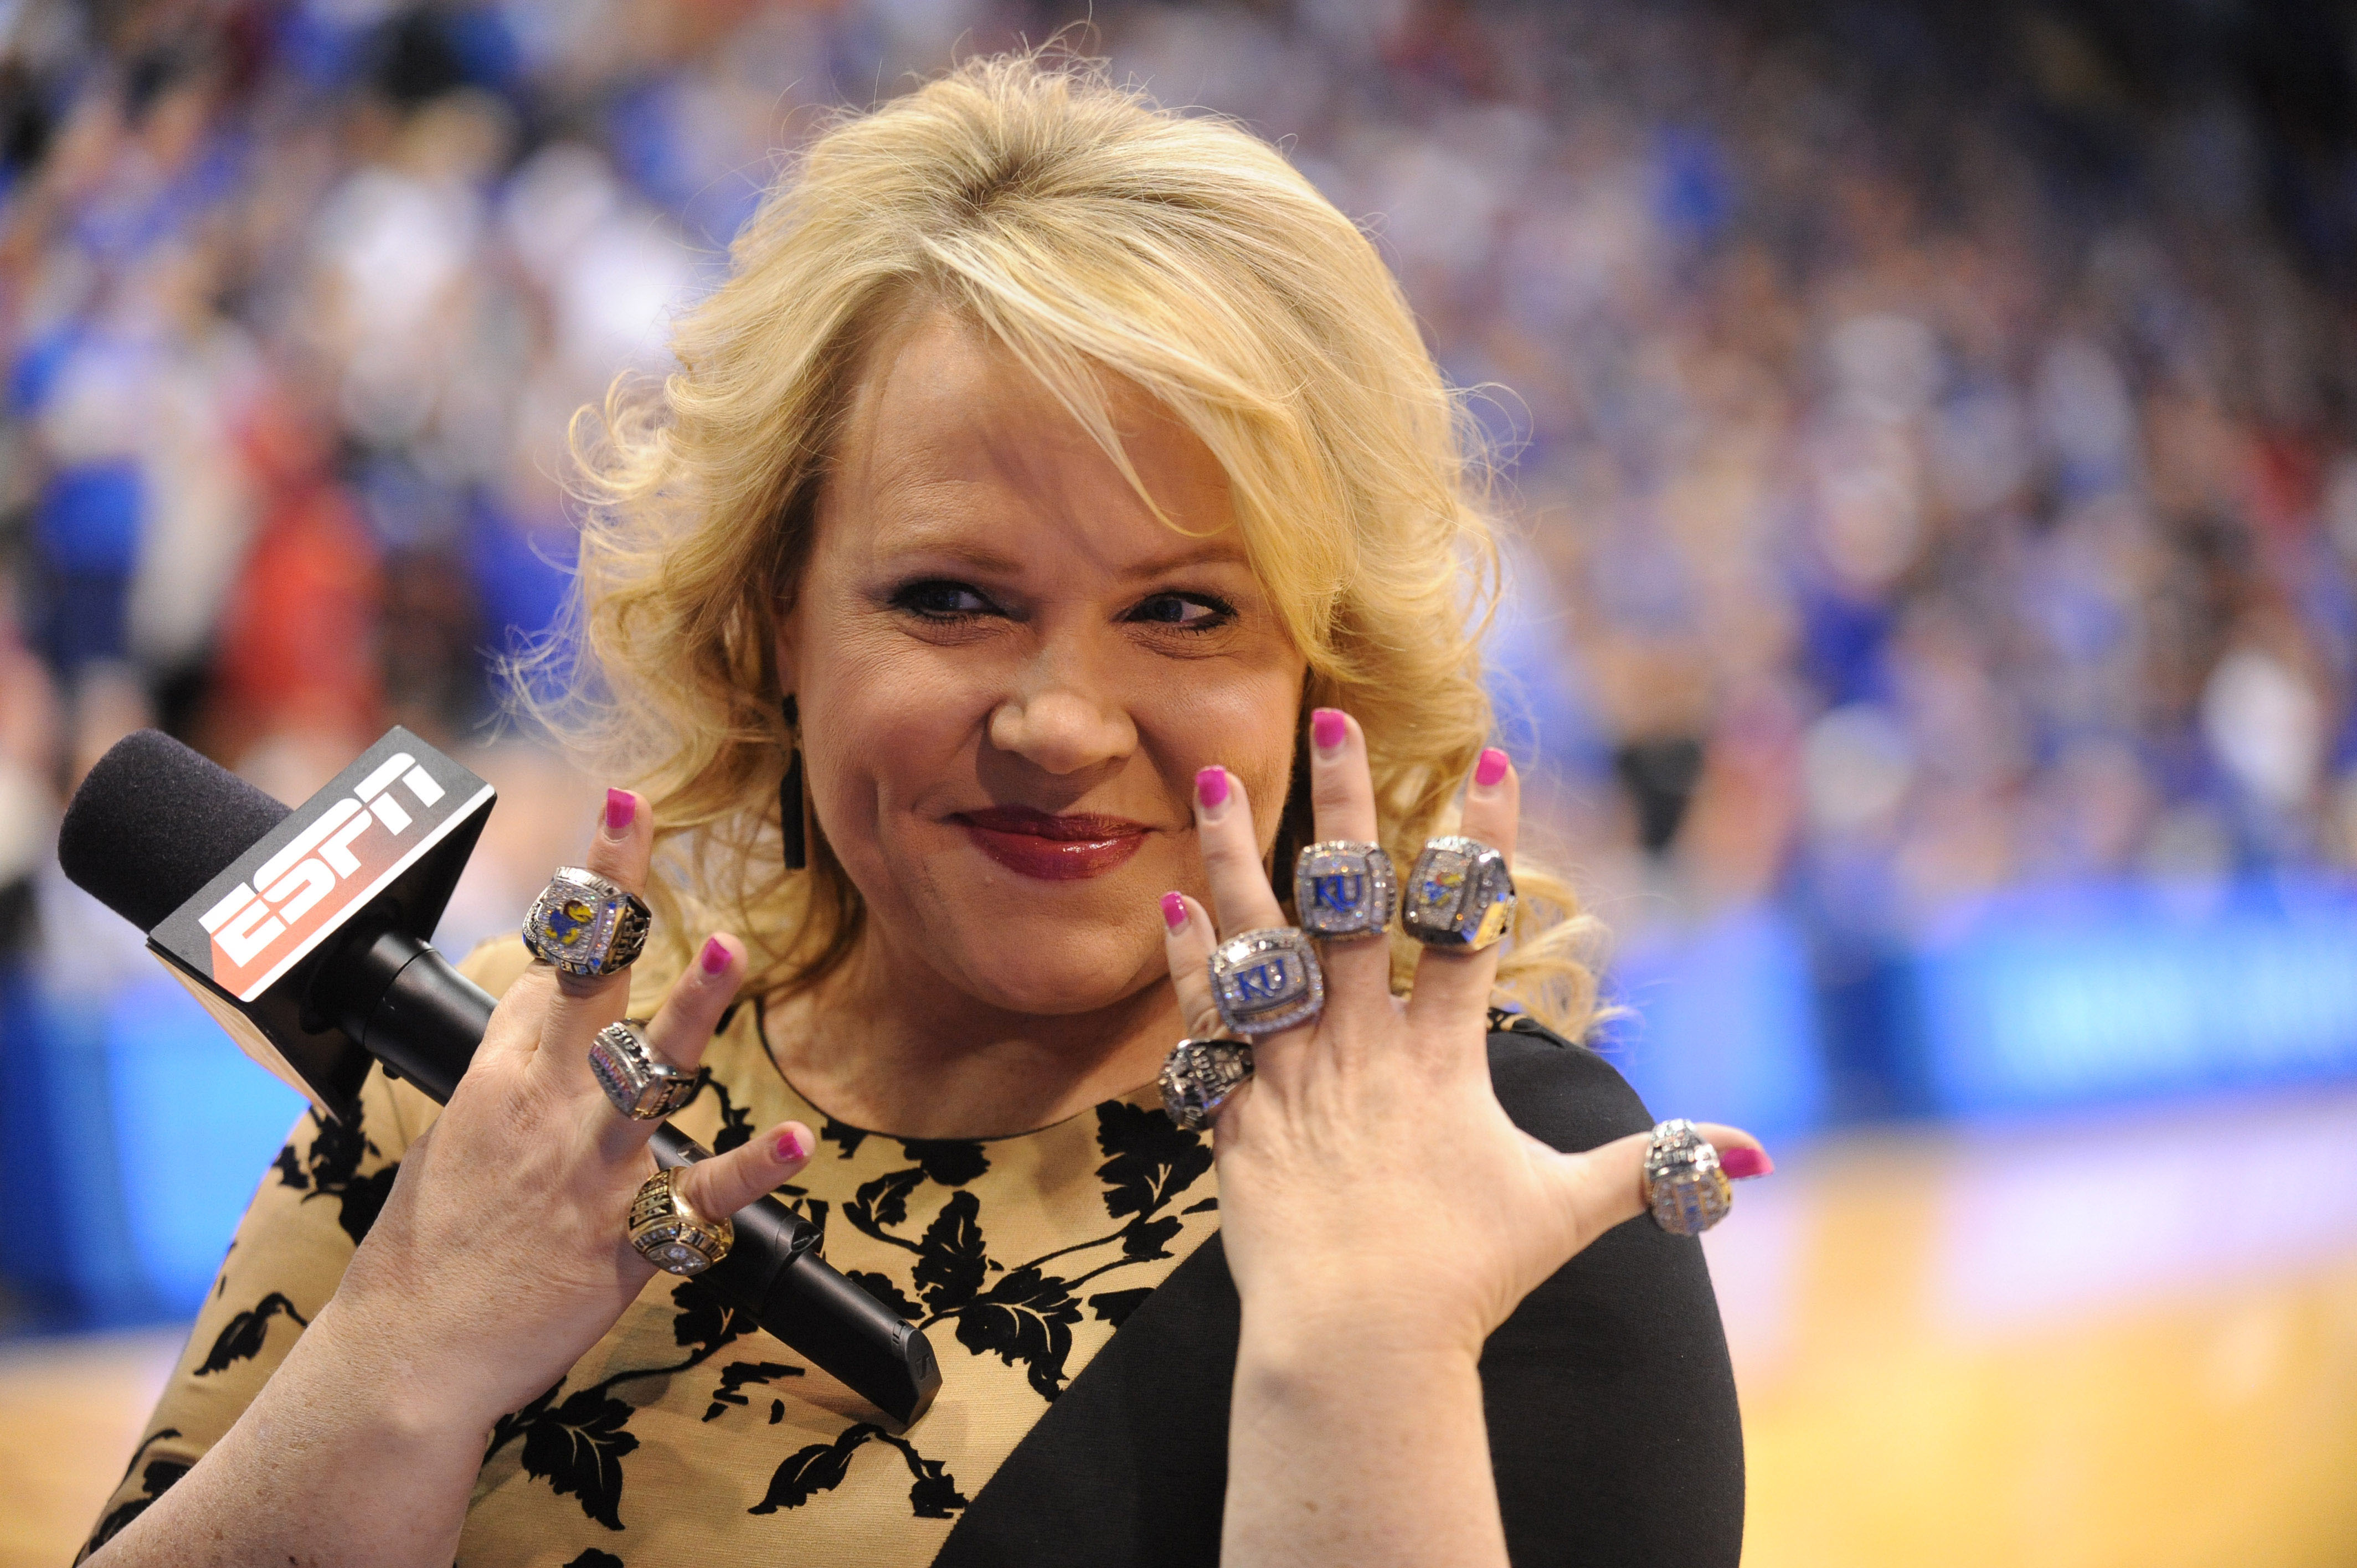 Holly Rowe belongs to all of Kansas, not just Lawrence.